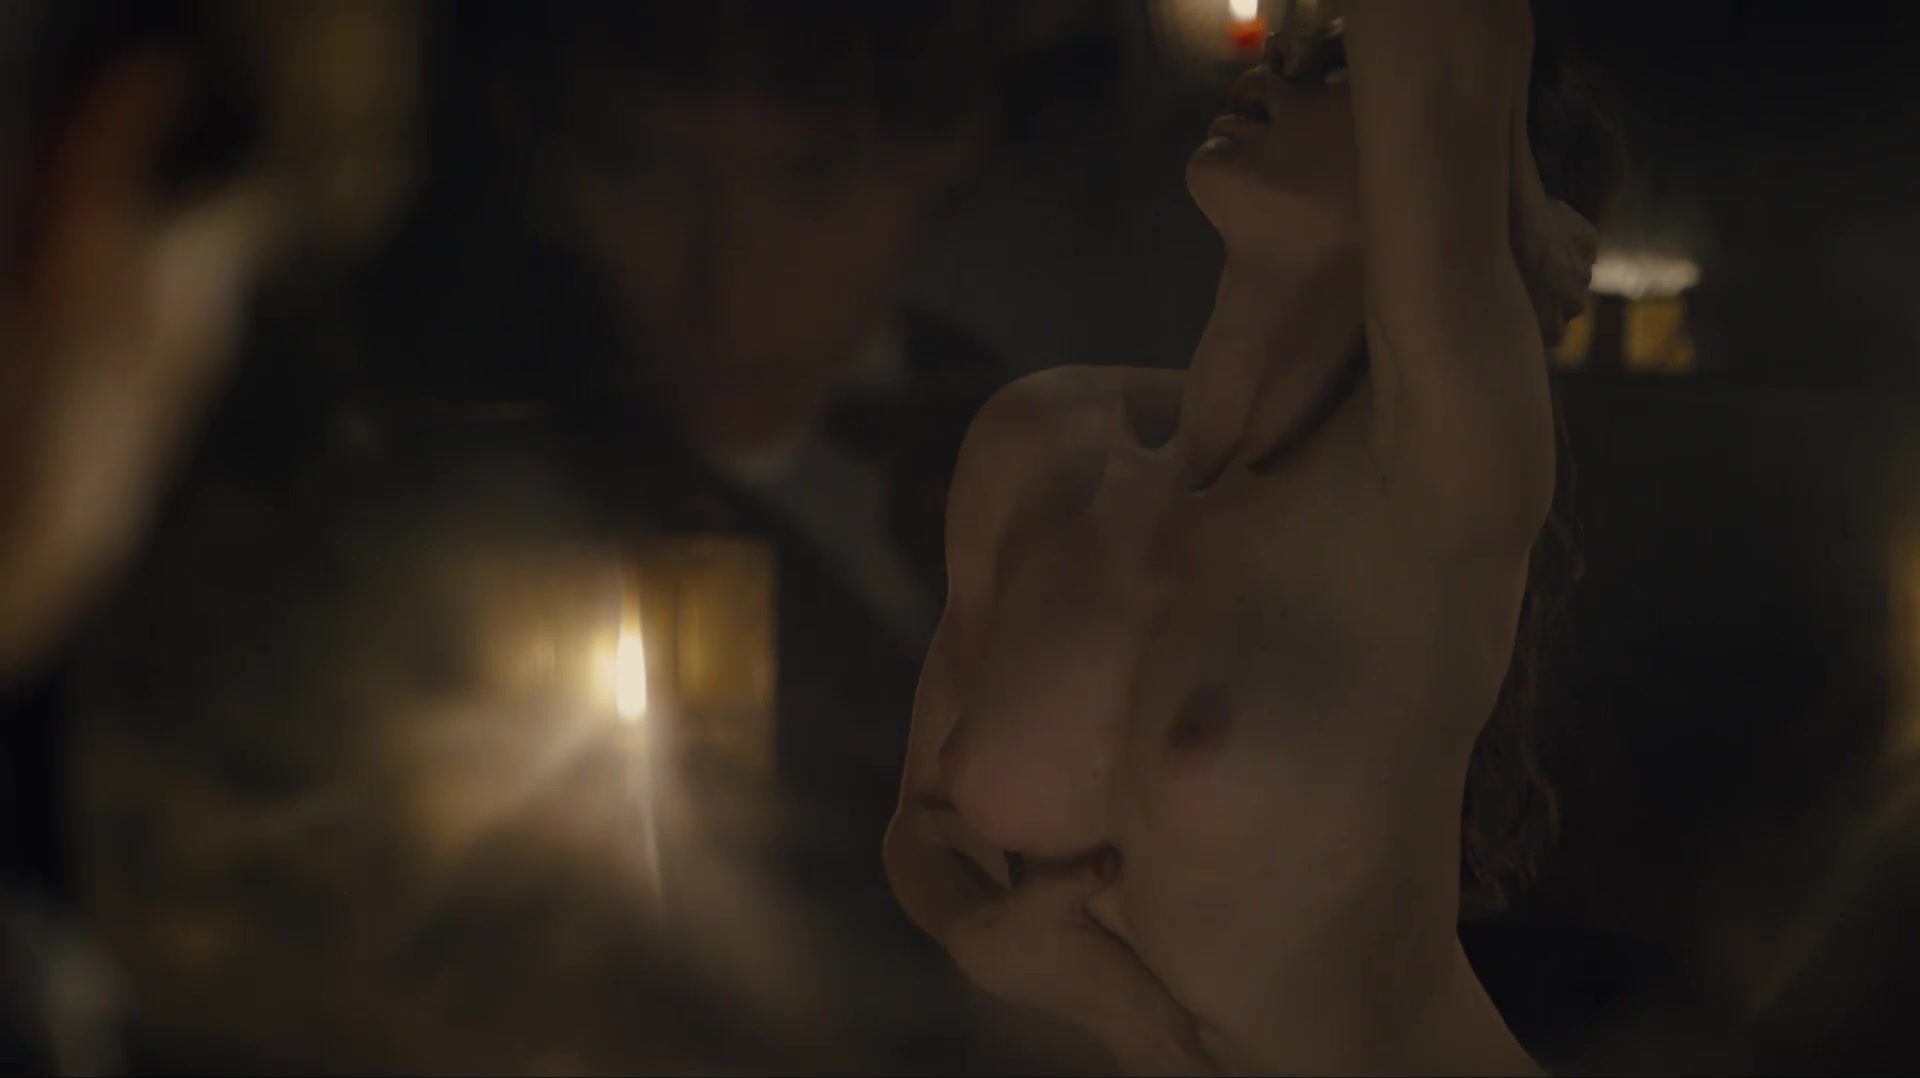 Hot Milf Director focuses on Sonya Cullingford's nice boobies showing them in The Danish Girl XCafe